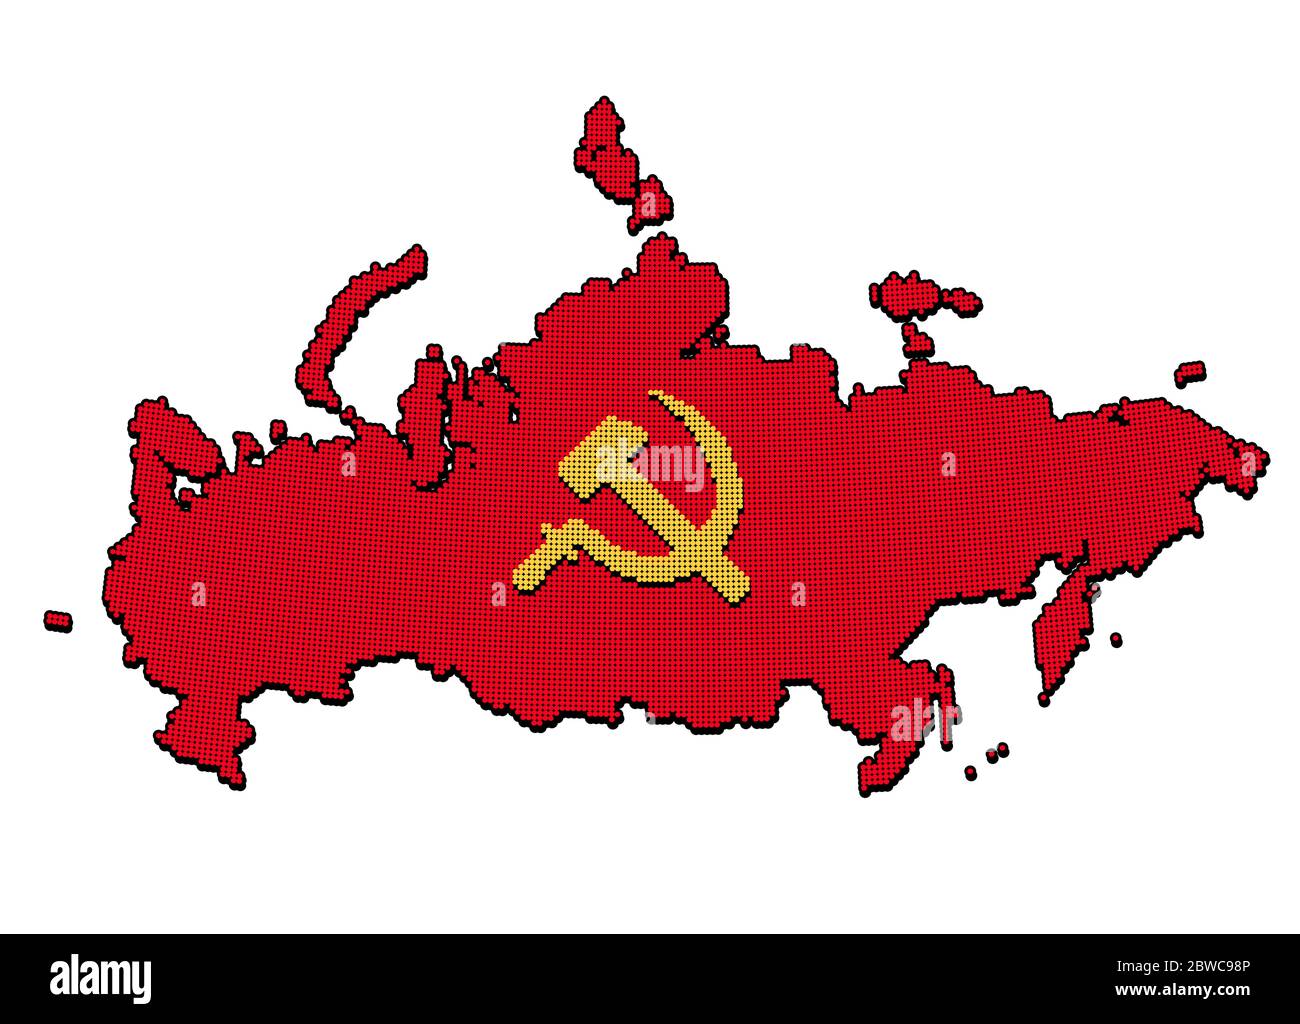 Stylized USSR map with hammer and sickle, communist Russia symbol. Pixel dot style pattern. Isolated vector illustration. Stock Vector